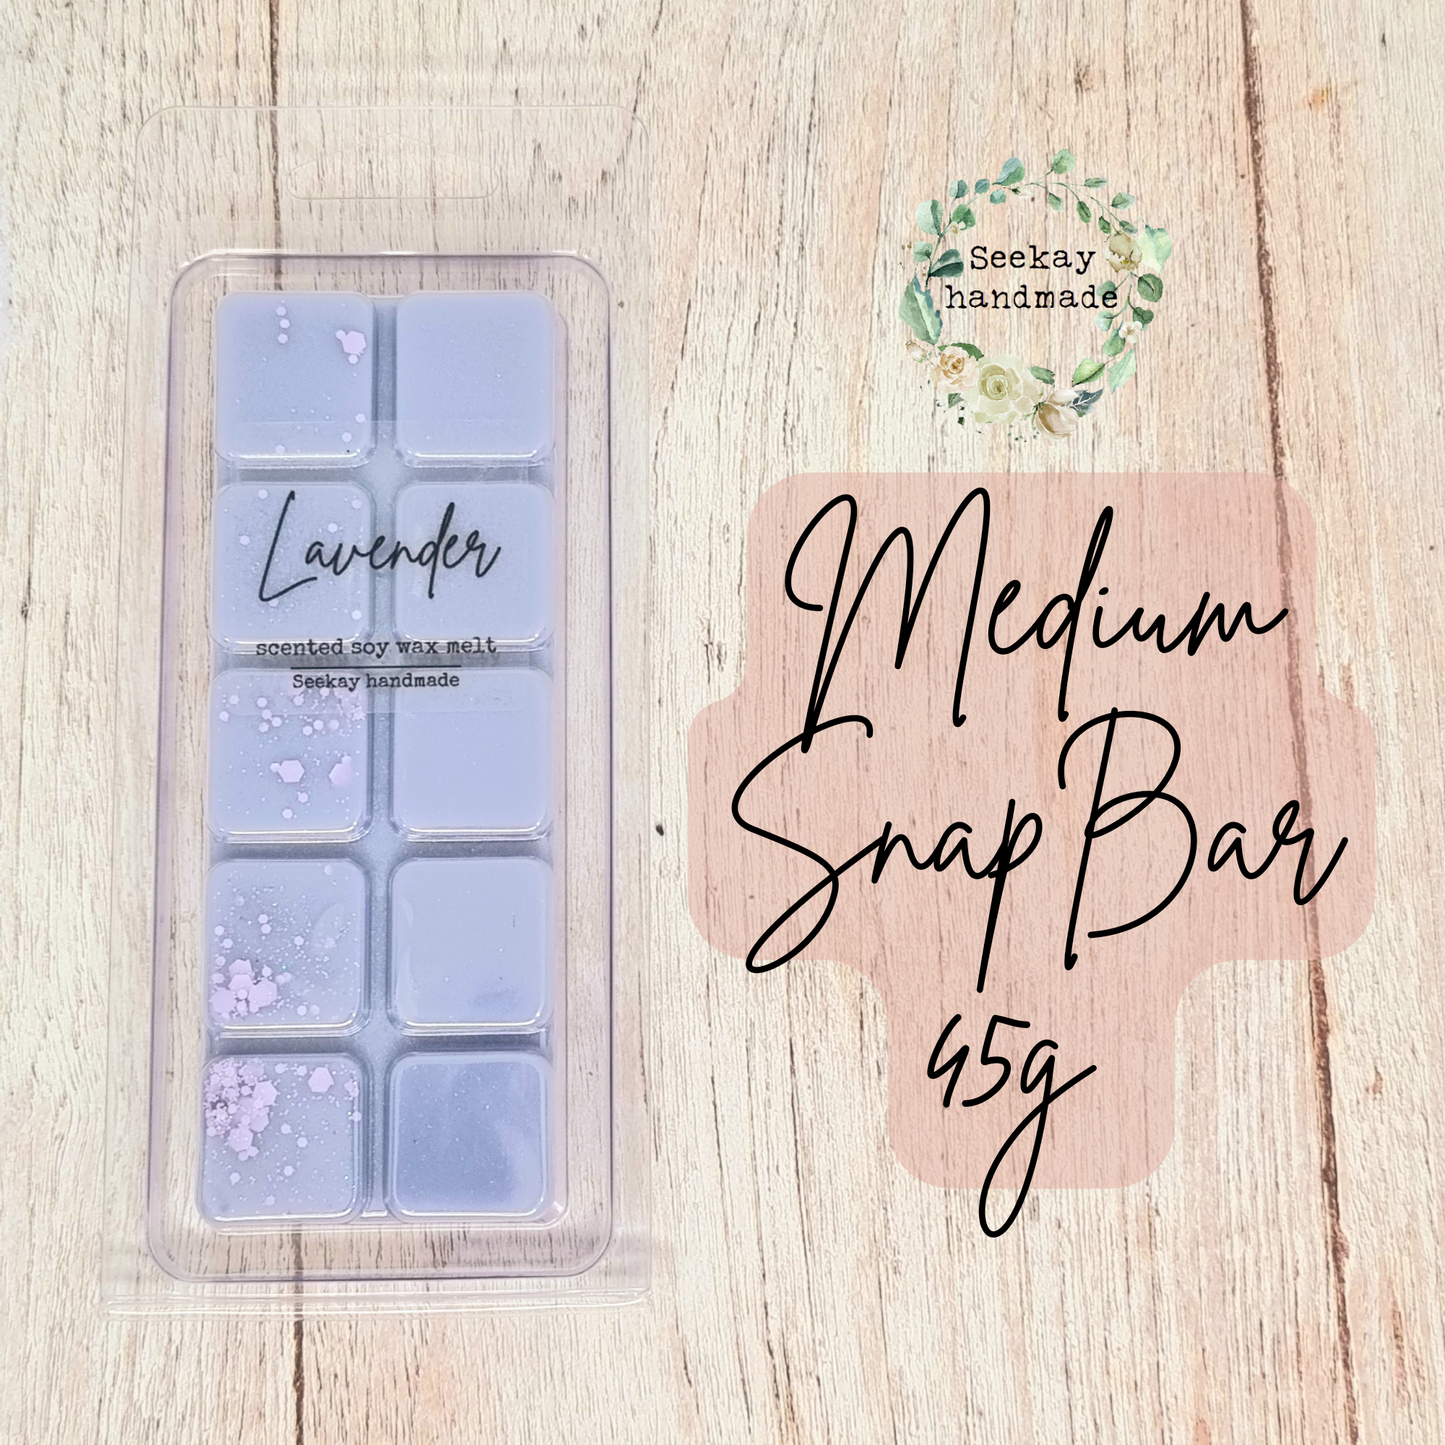 Lavender scented soy wax melt